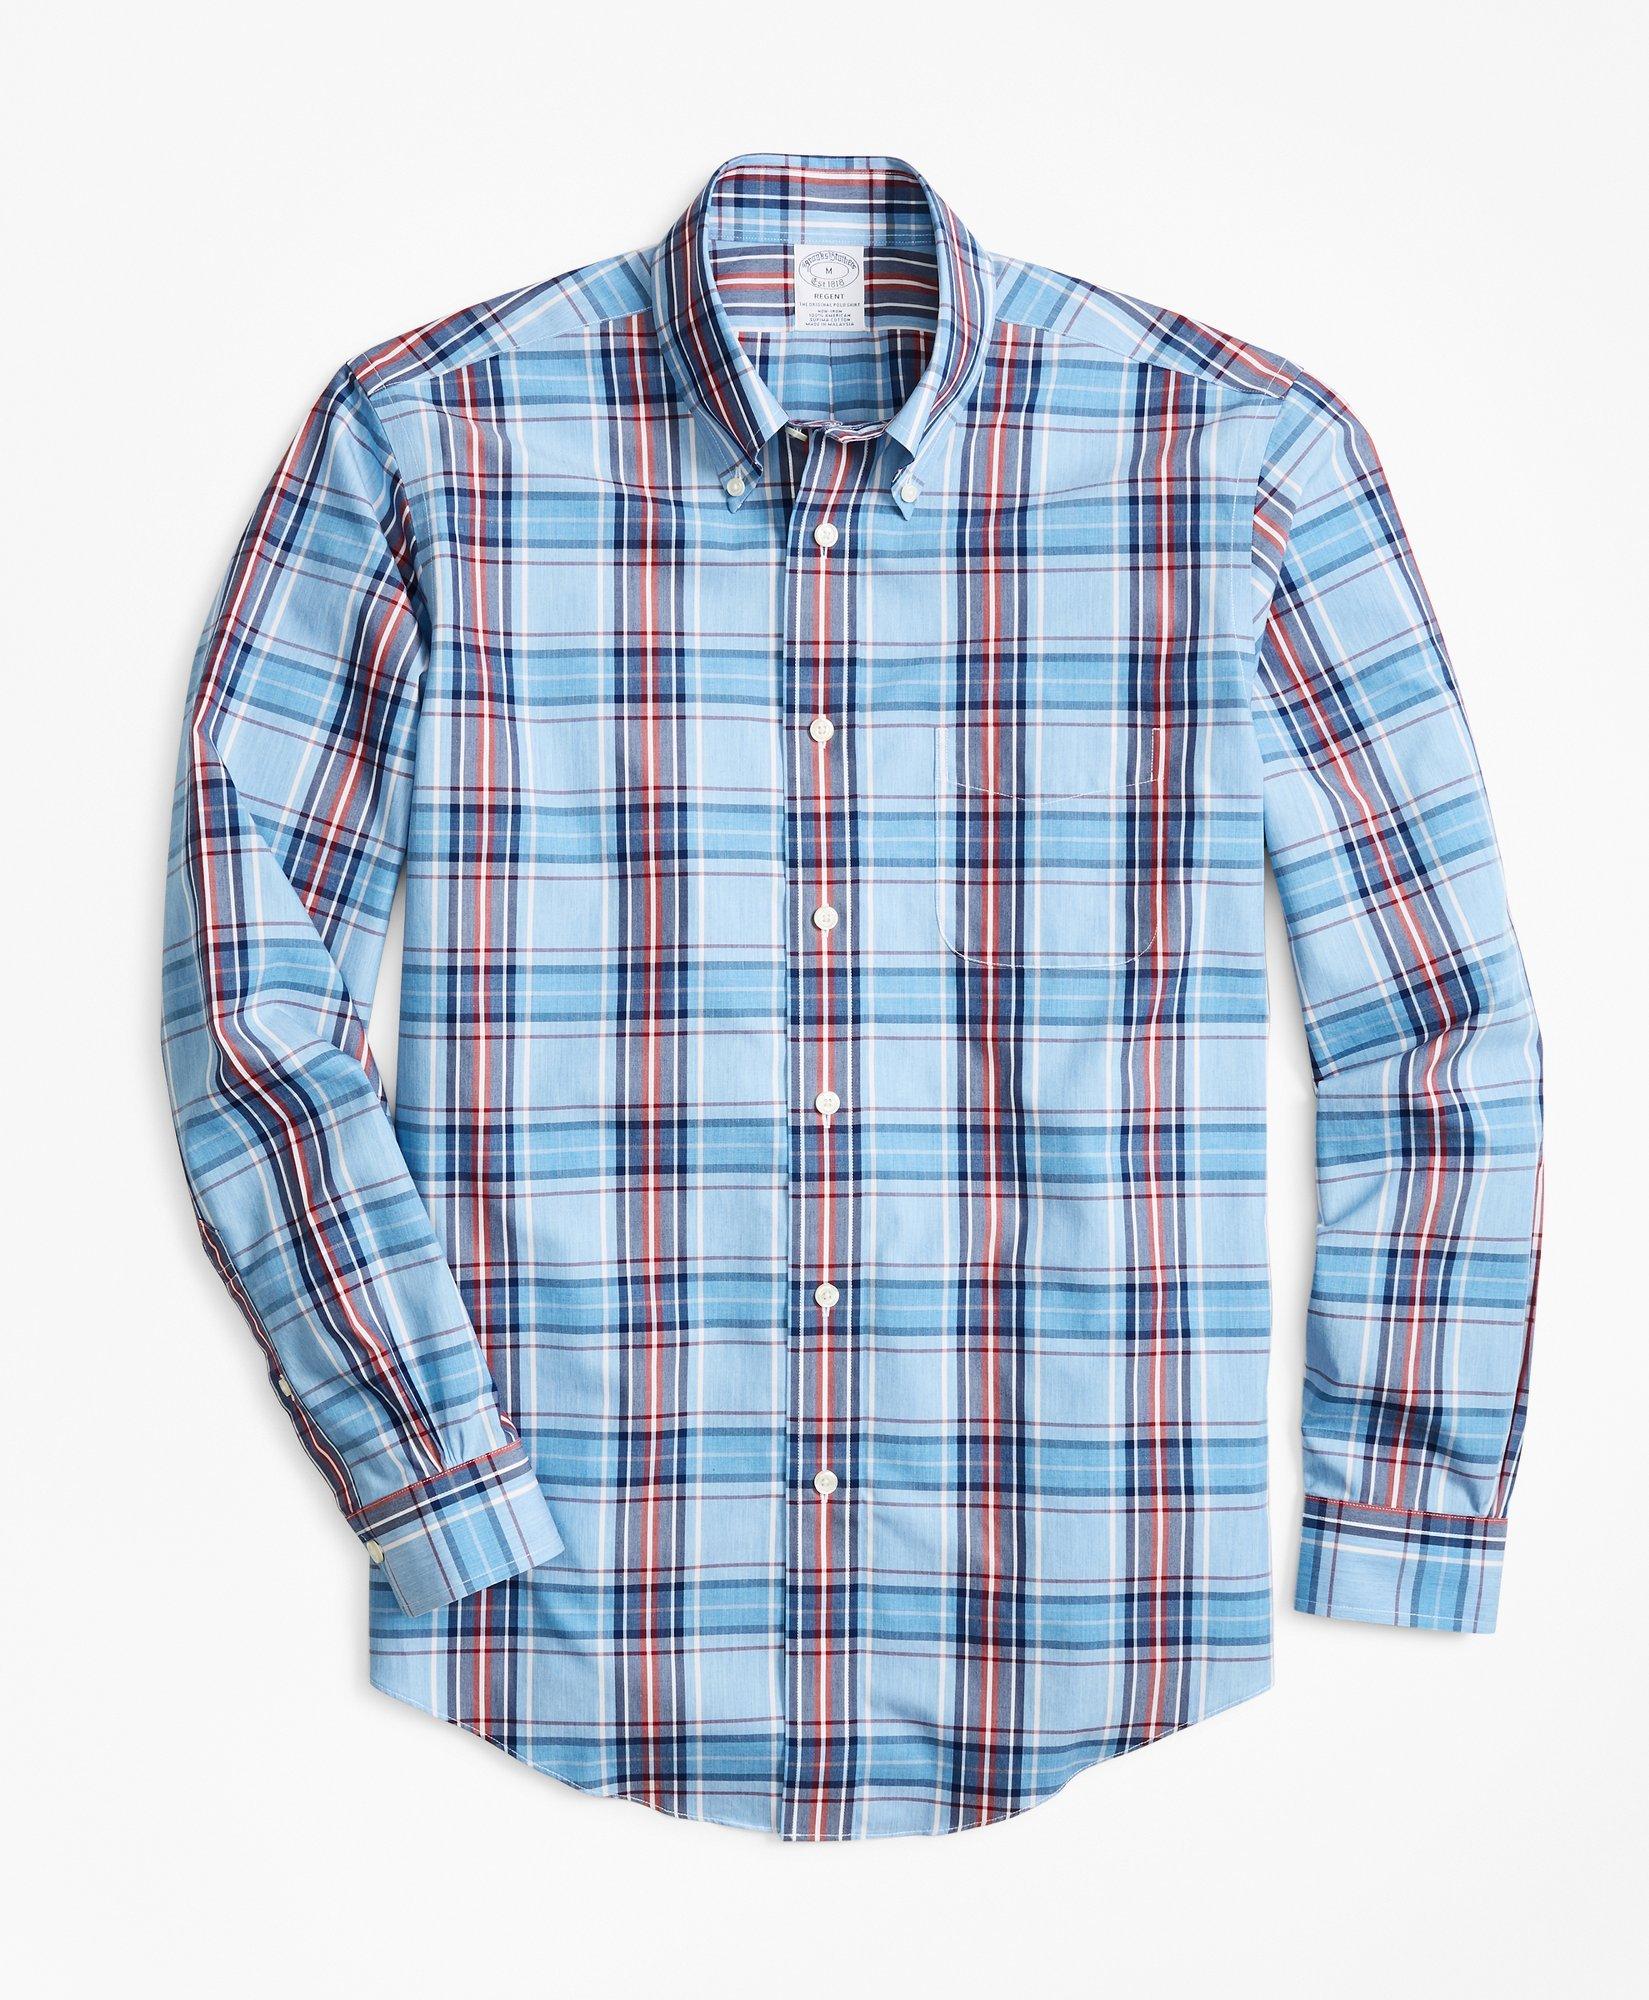 Regent Regular-Fit Sport Shirt, Non-Iron Blue and Red Plaid, image 1